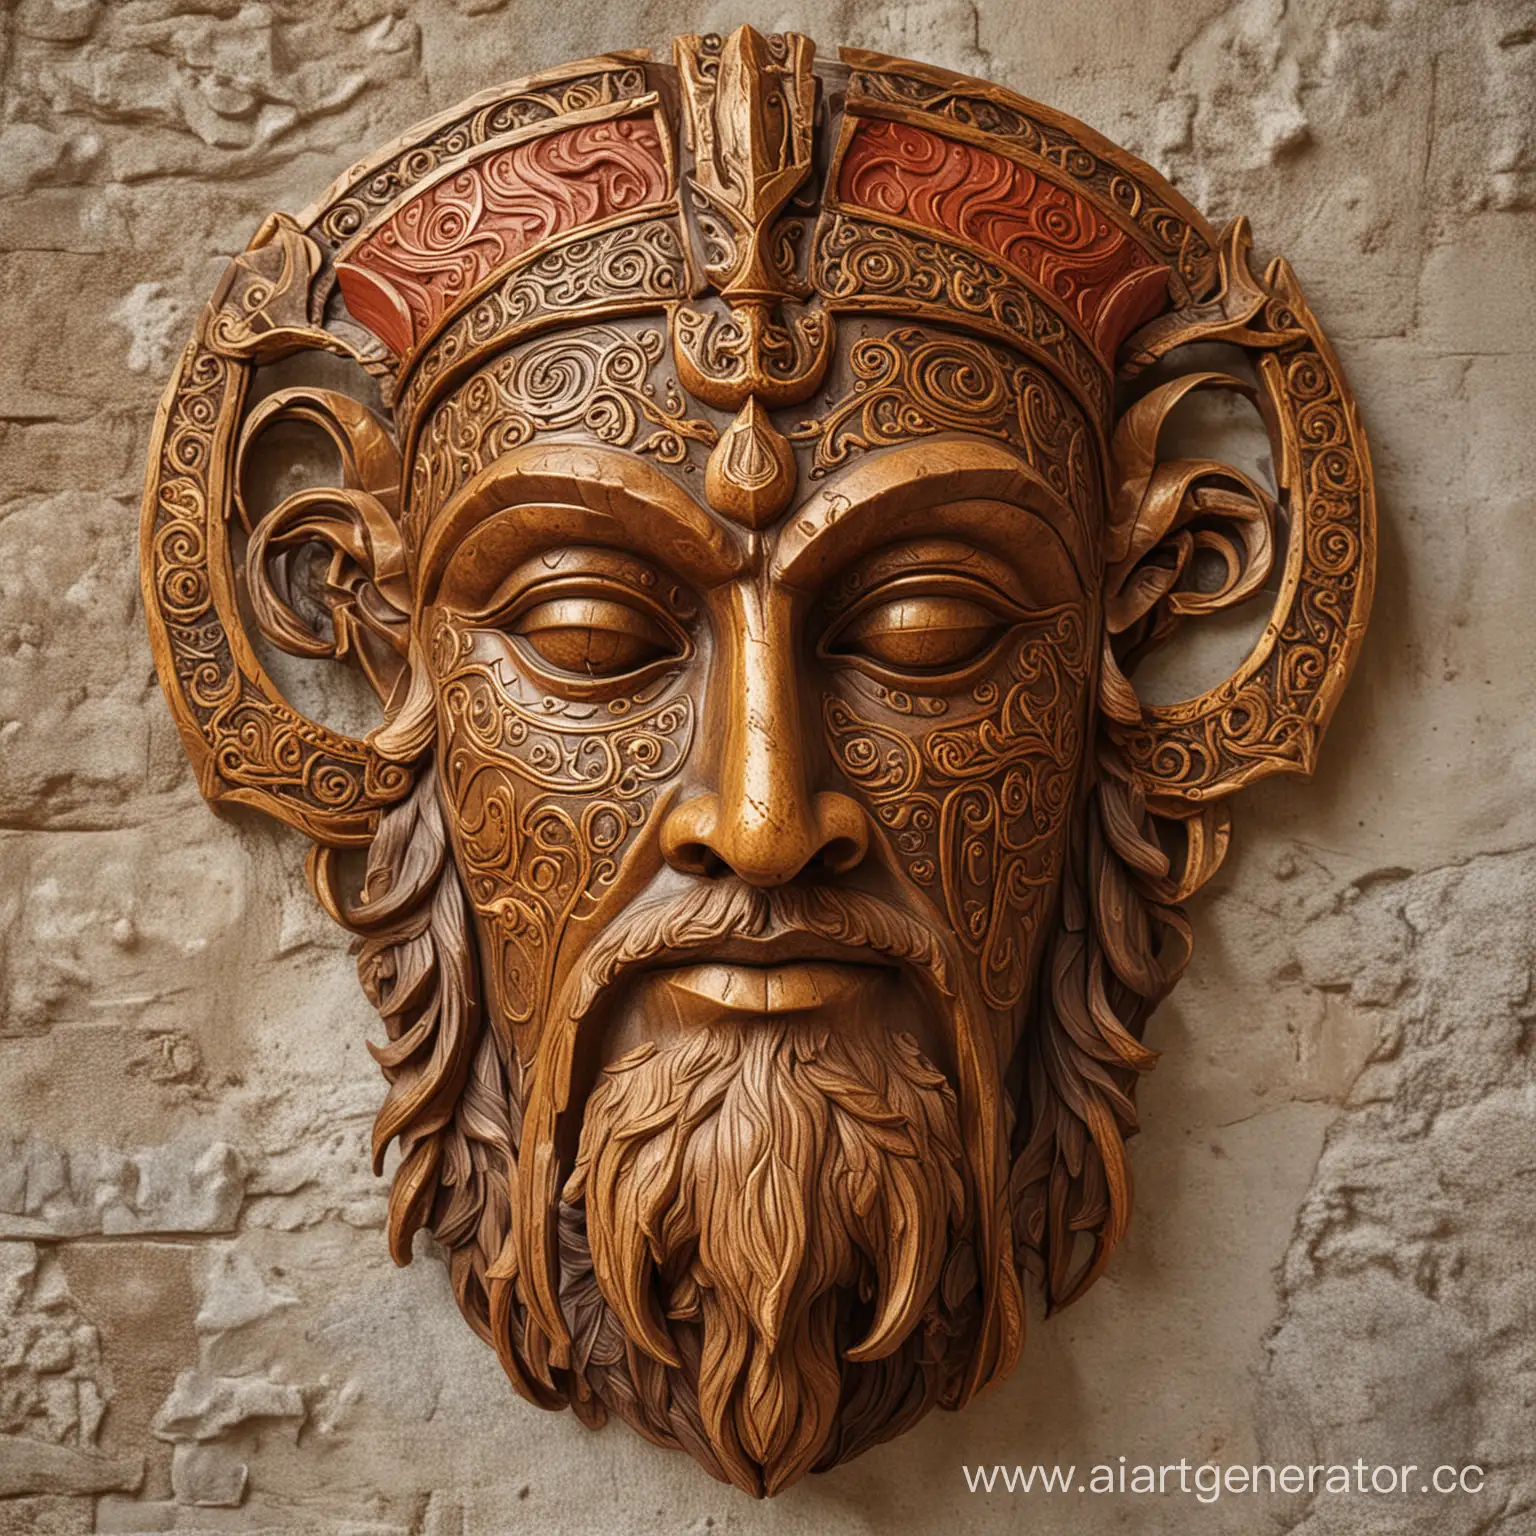 Intricately-Crafted-Antique-Style-Freyr-God-Mask-in-Earthy-Tones